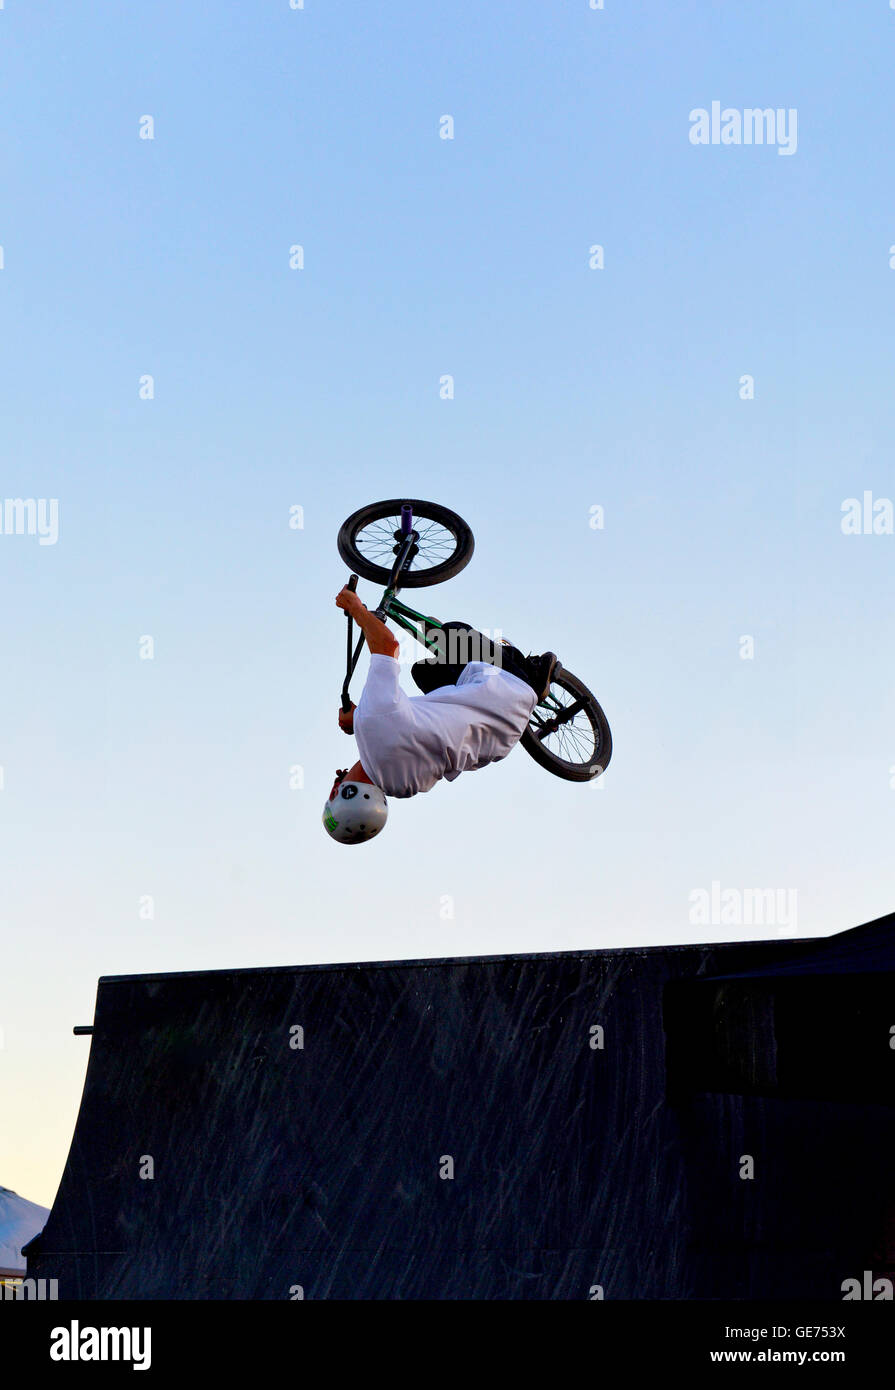 A person doing a back flip over a jump on a BMX bicycle Stock Photo